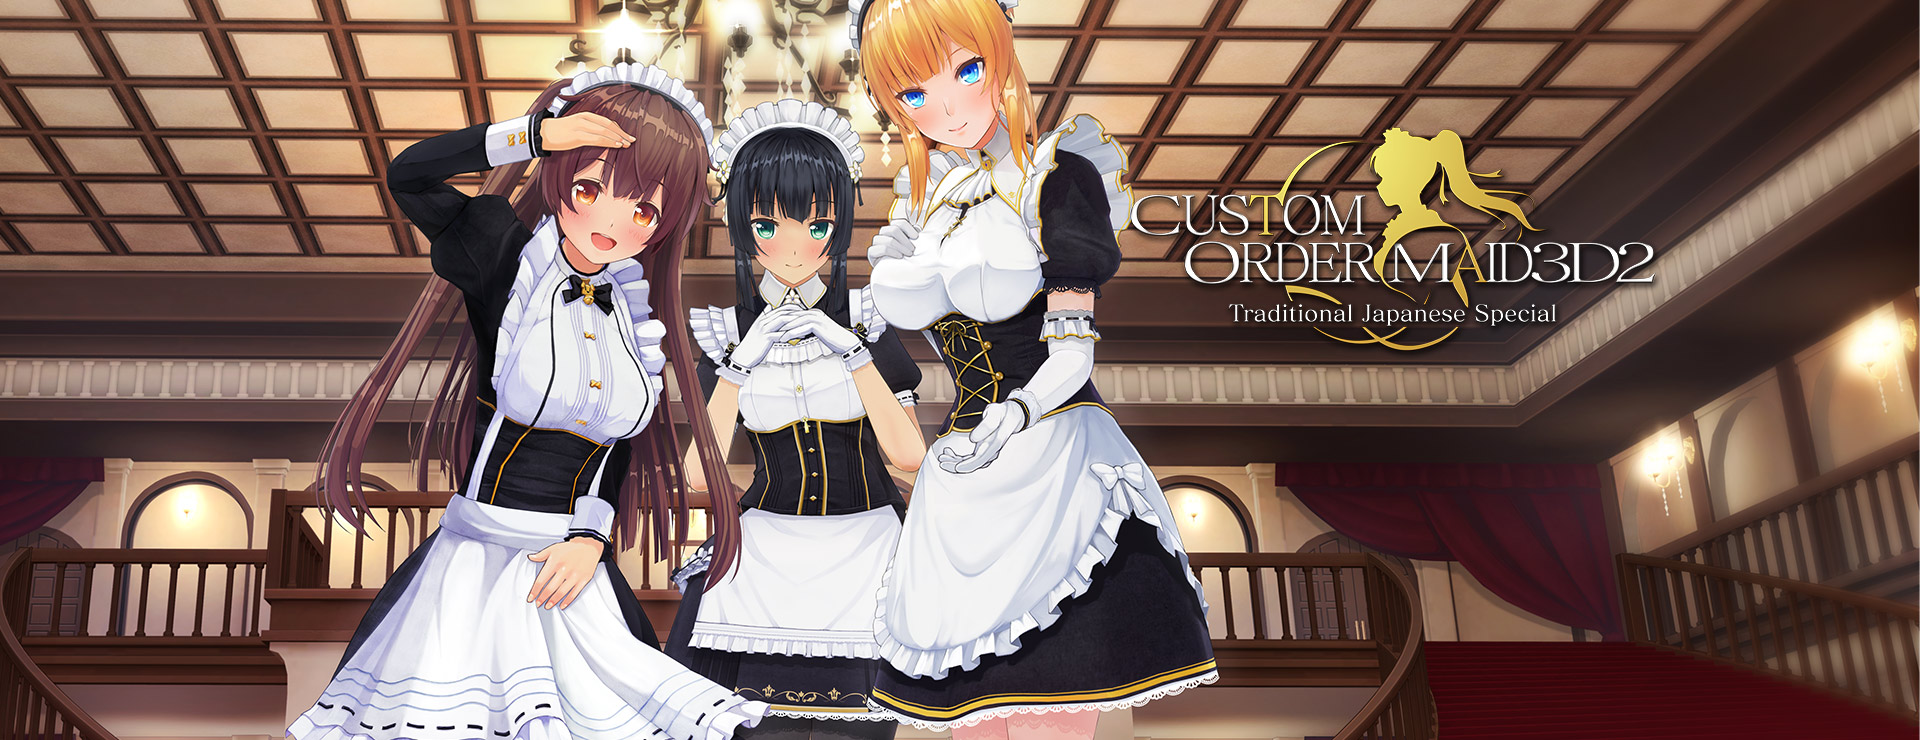 Custom Order Maid 3D2: Traditional Japanese Special All in Pack - Simulation Game